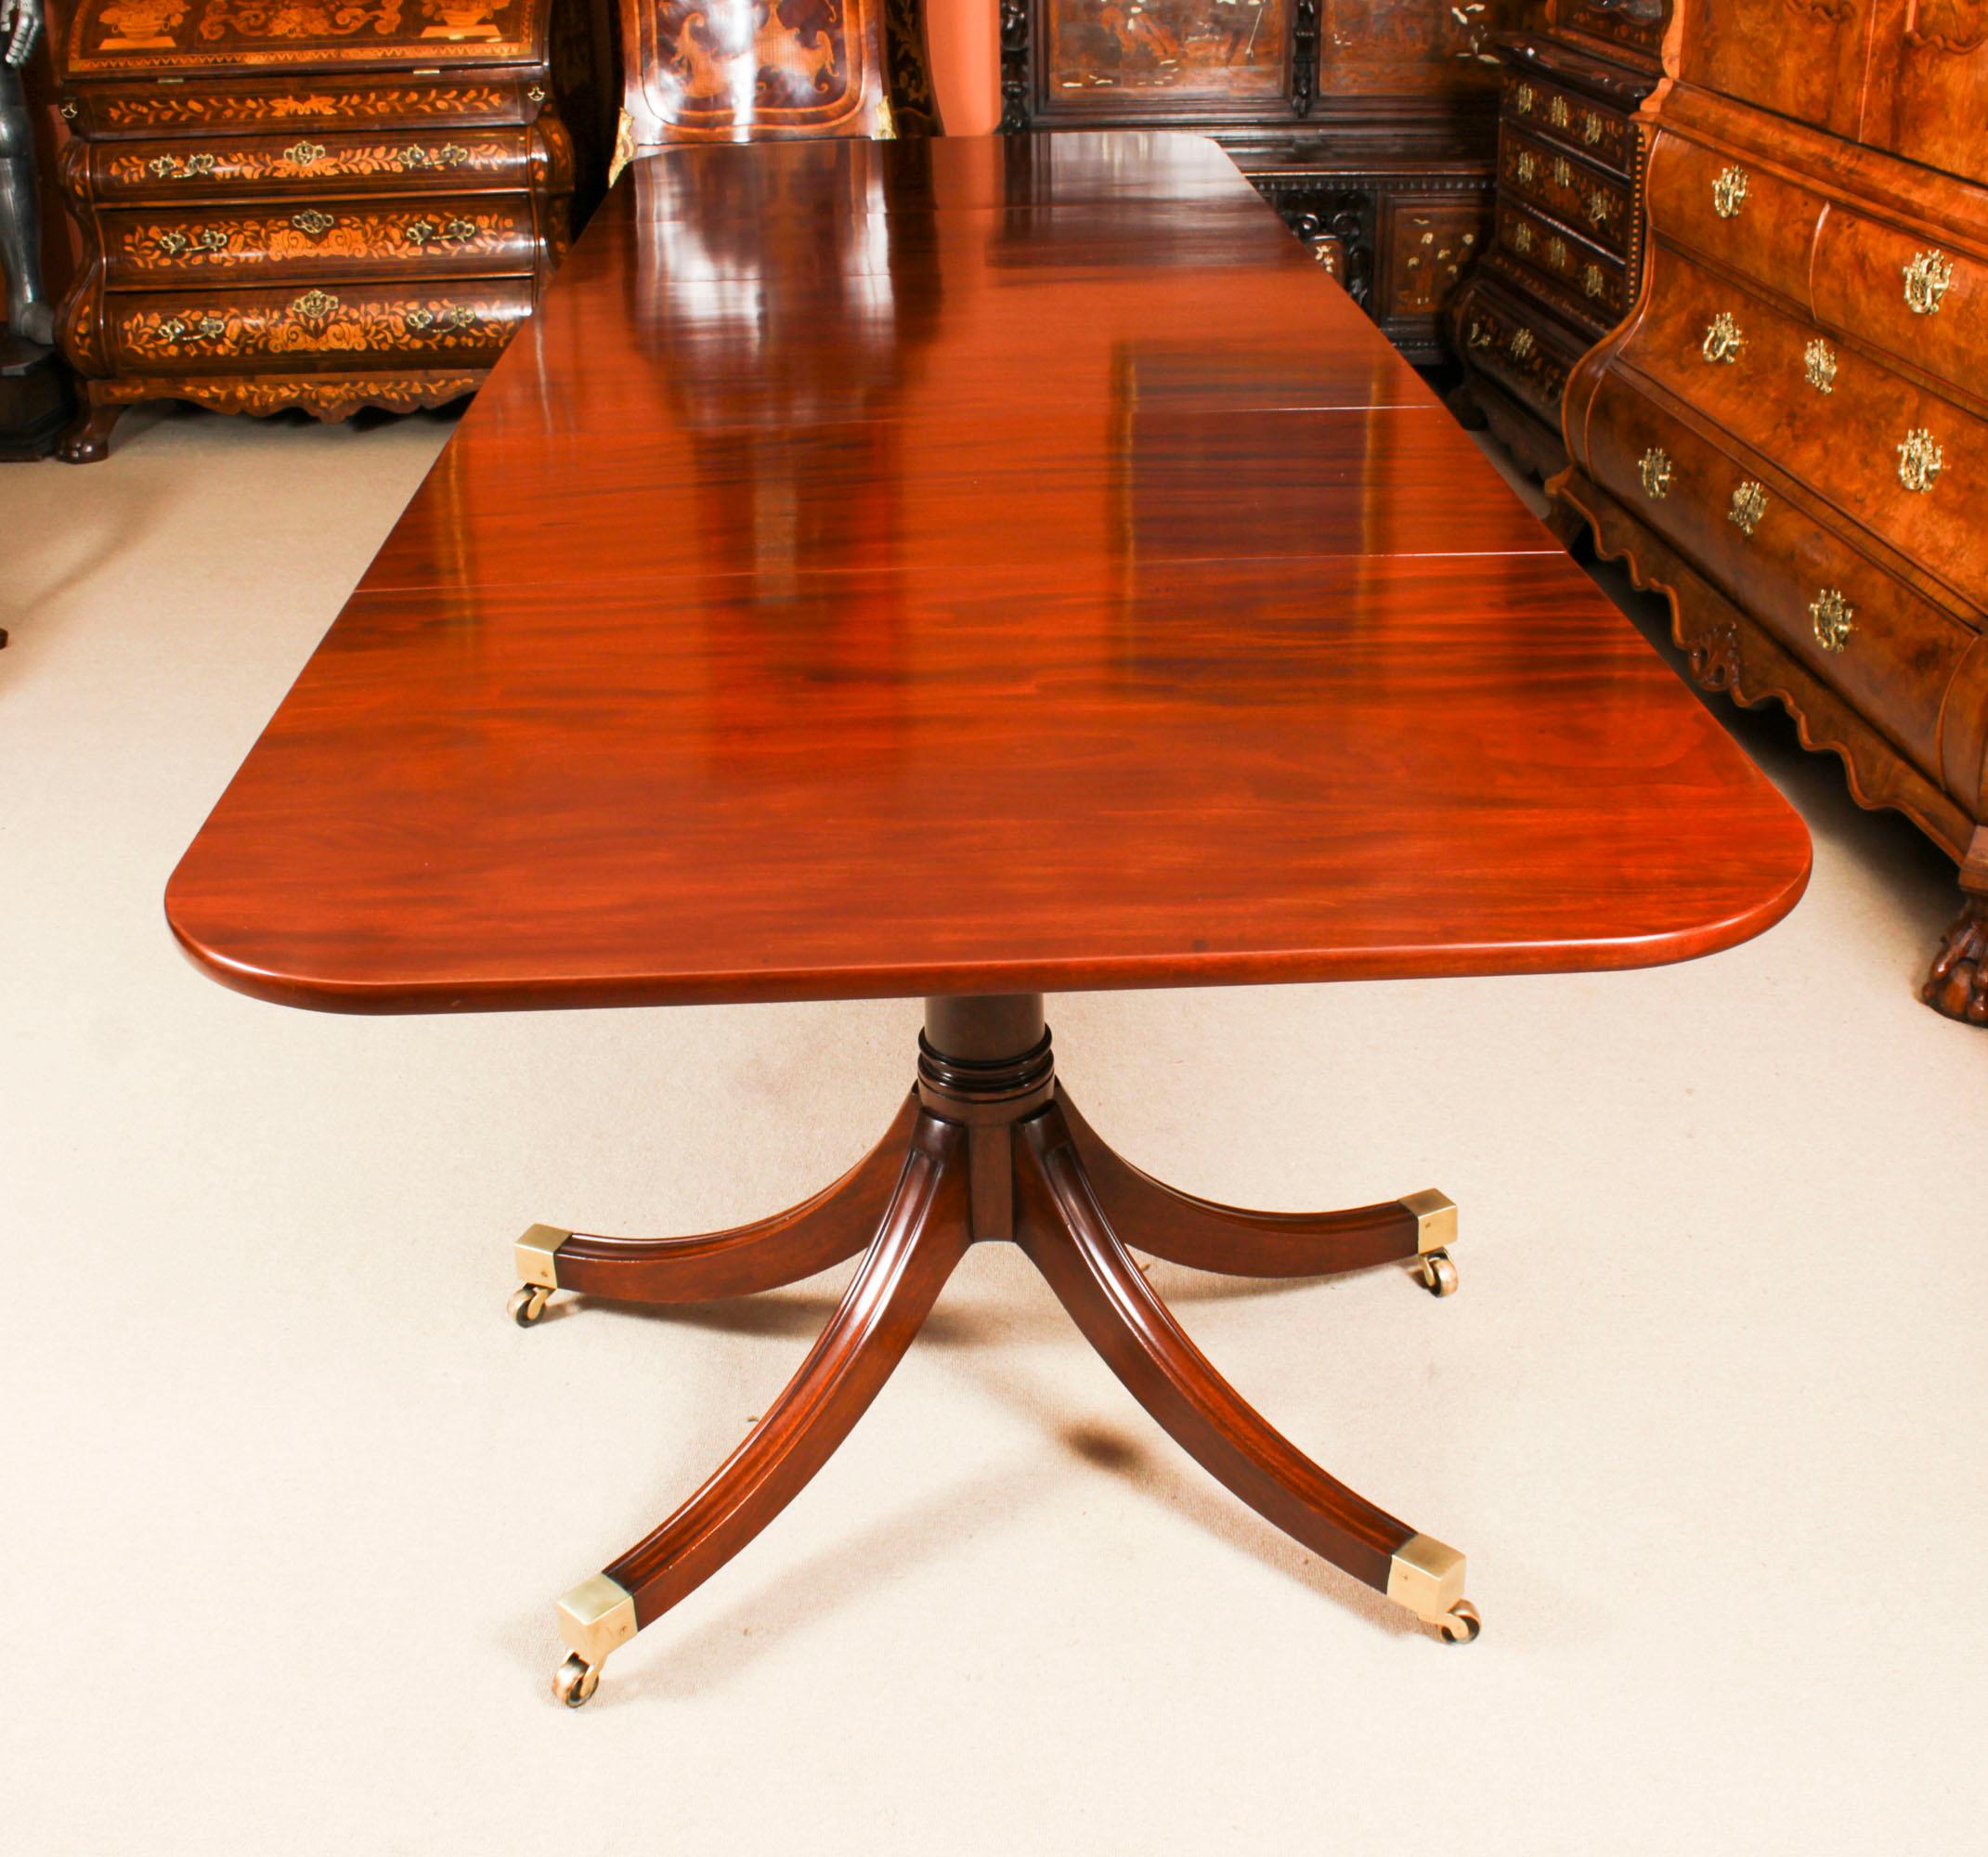 Antique 12ft Regency Revival Triple Pillar Dining Table 19th C In Good Condition For Sale In London, GB